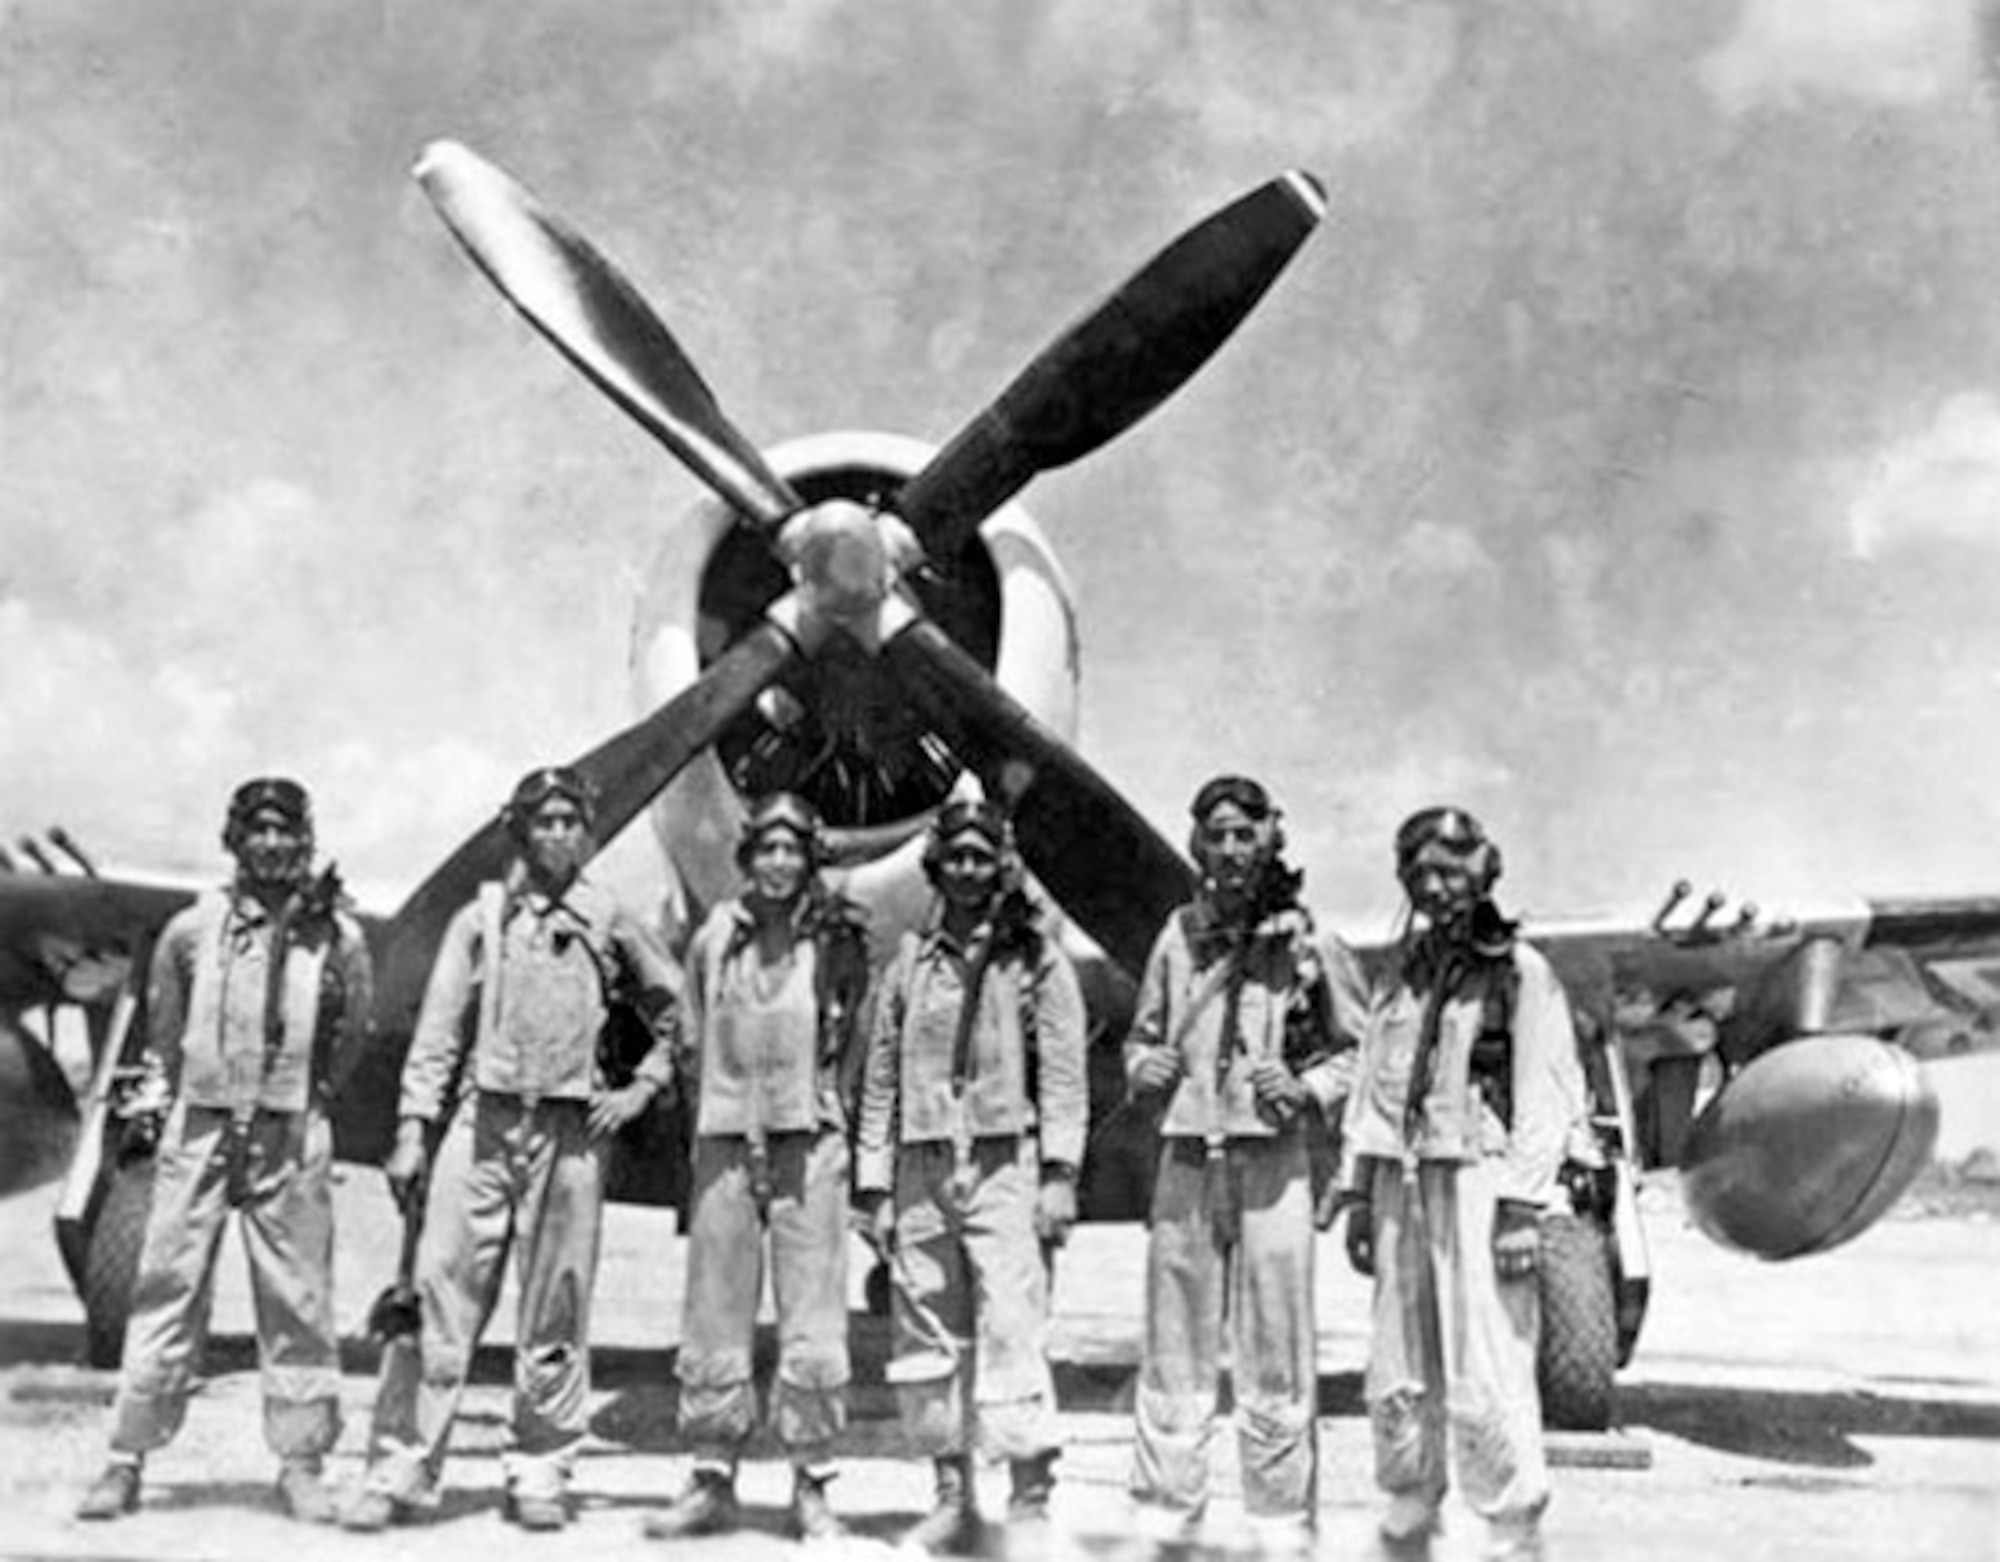 Mexican air force Escuadron 201 pilots stand in front of an aircraft prior to flying a combat mission in the Philippines. Members of the Escuadron 201 fought alongside U.S. forces during World War II. (U.S. Air Force photo)